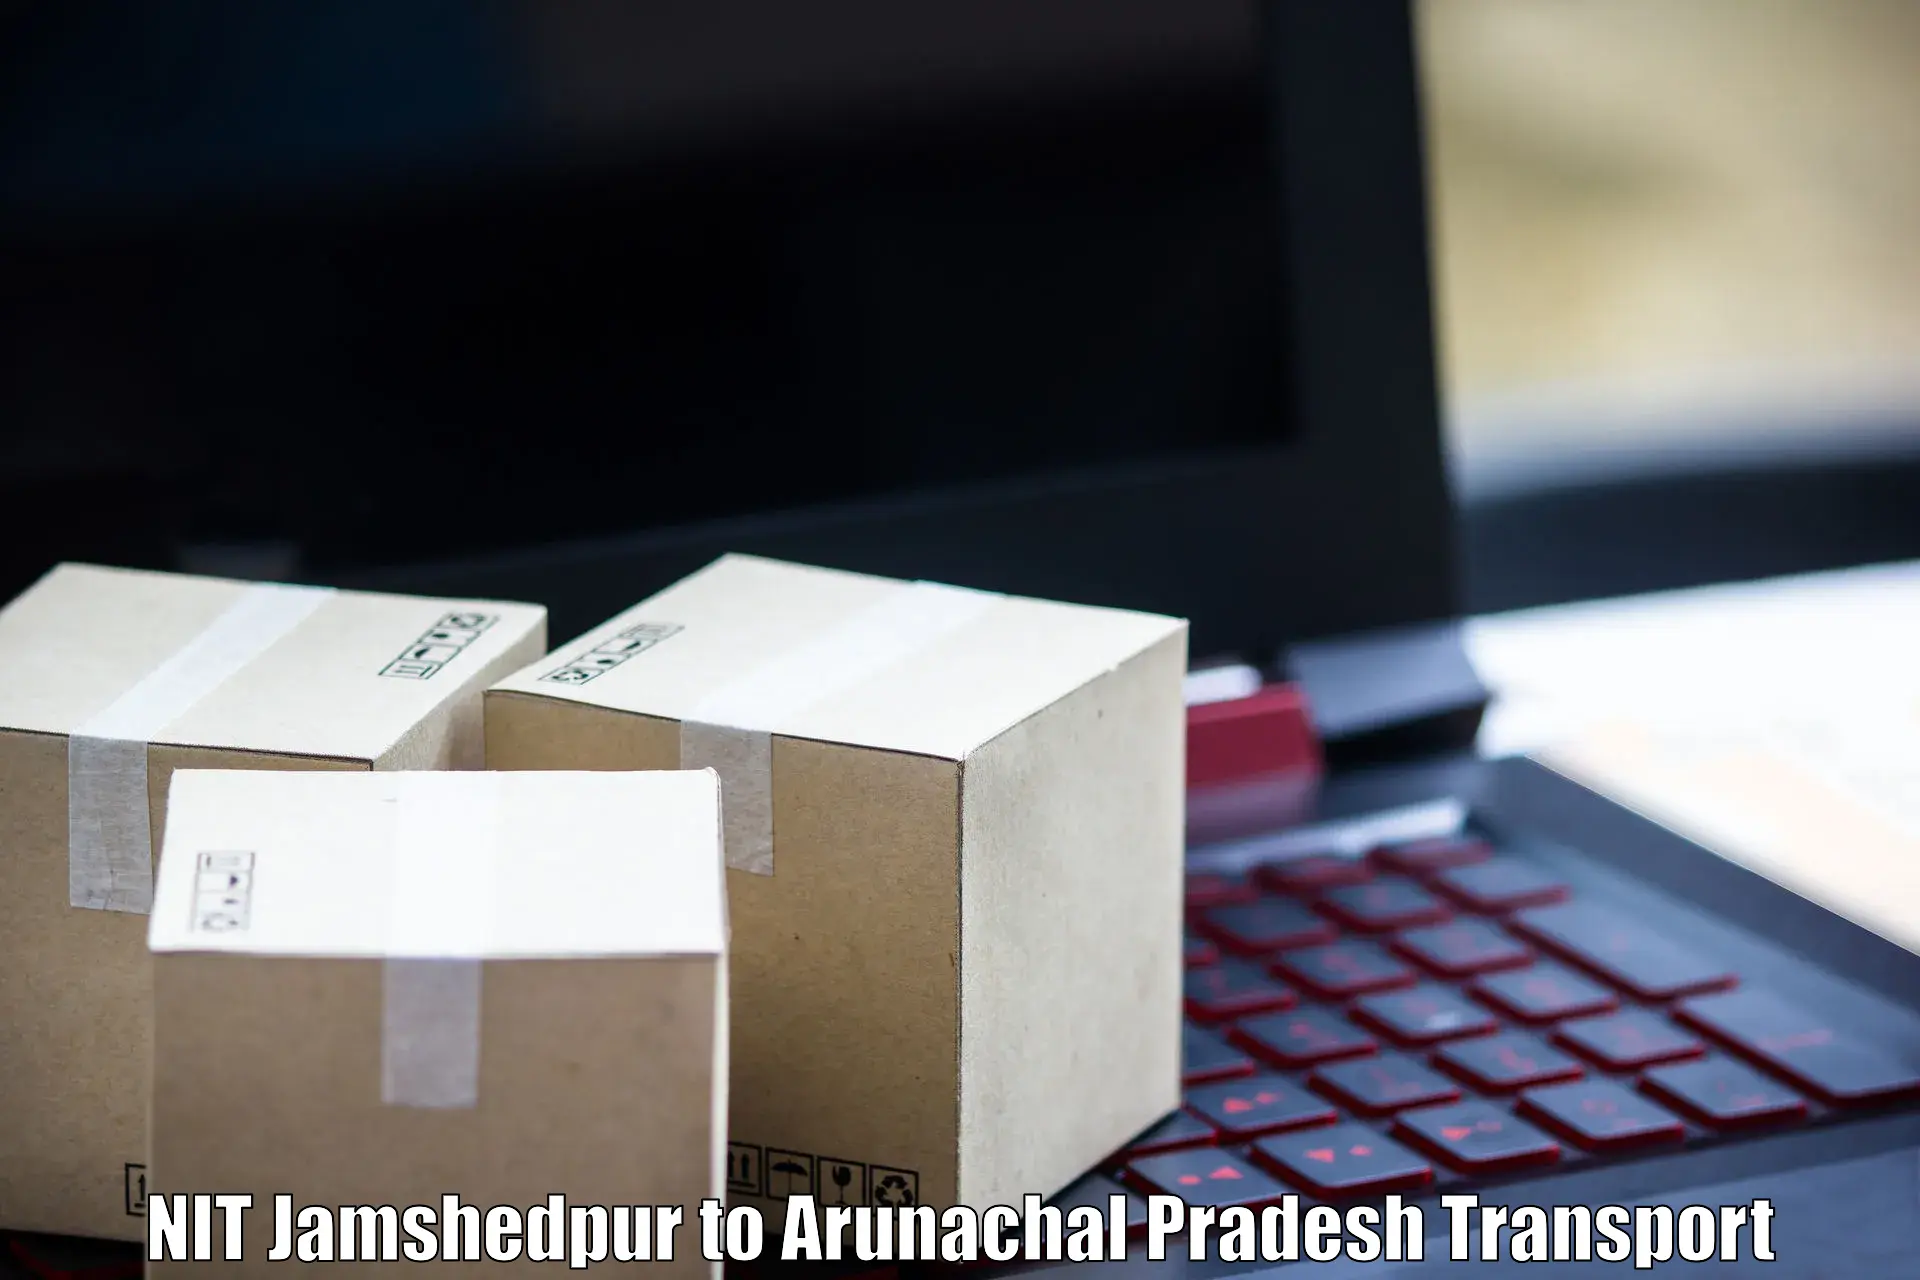 Daily parcel service transport NIT Jamshedpur to NIT Yupia